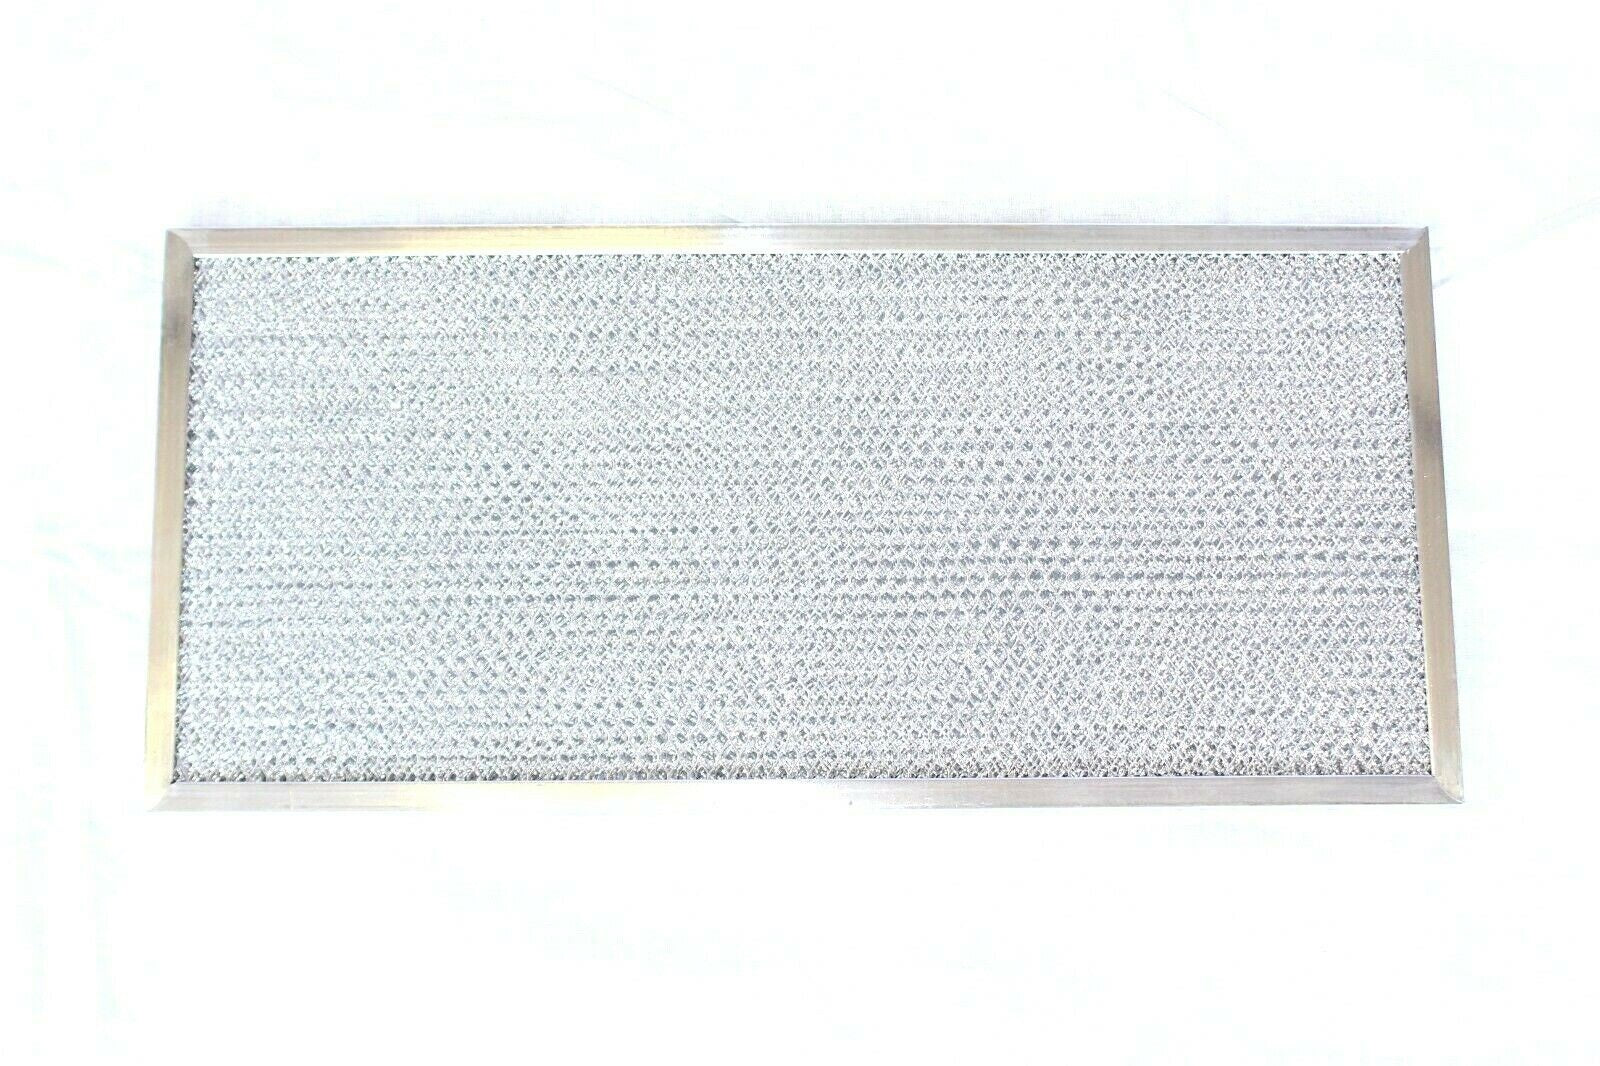 Air Filter For R-5045 Unit 78R5400M